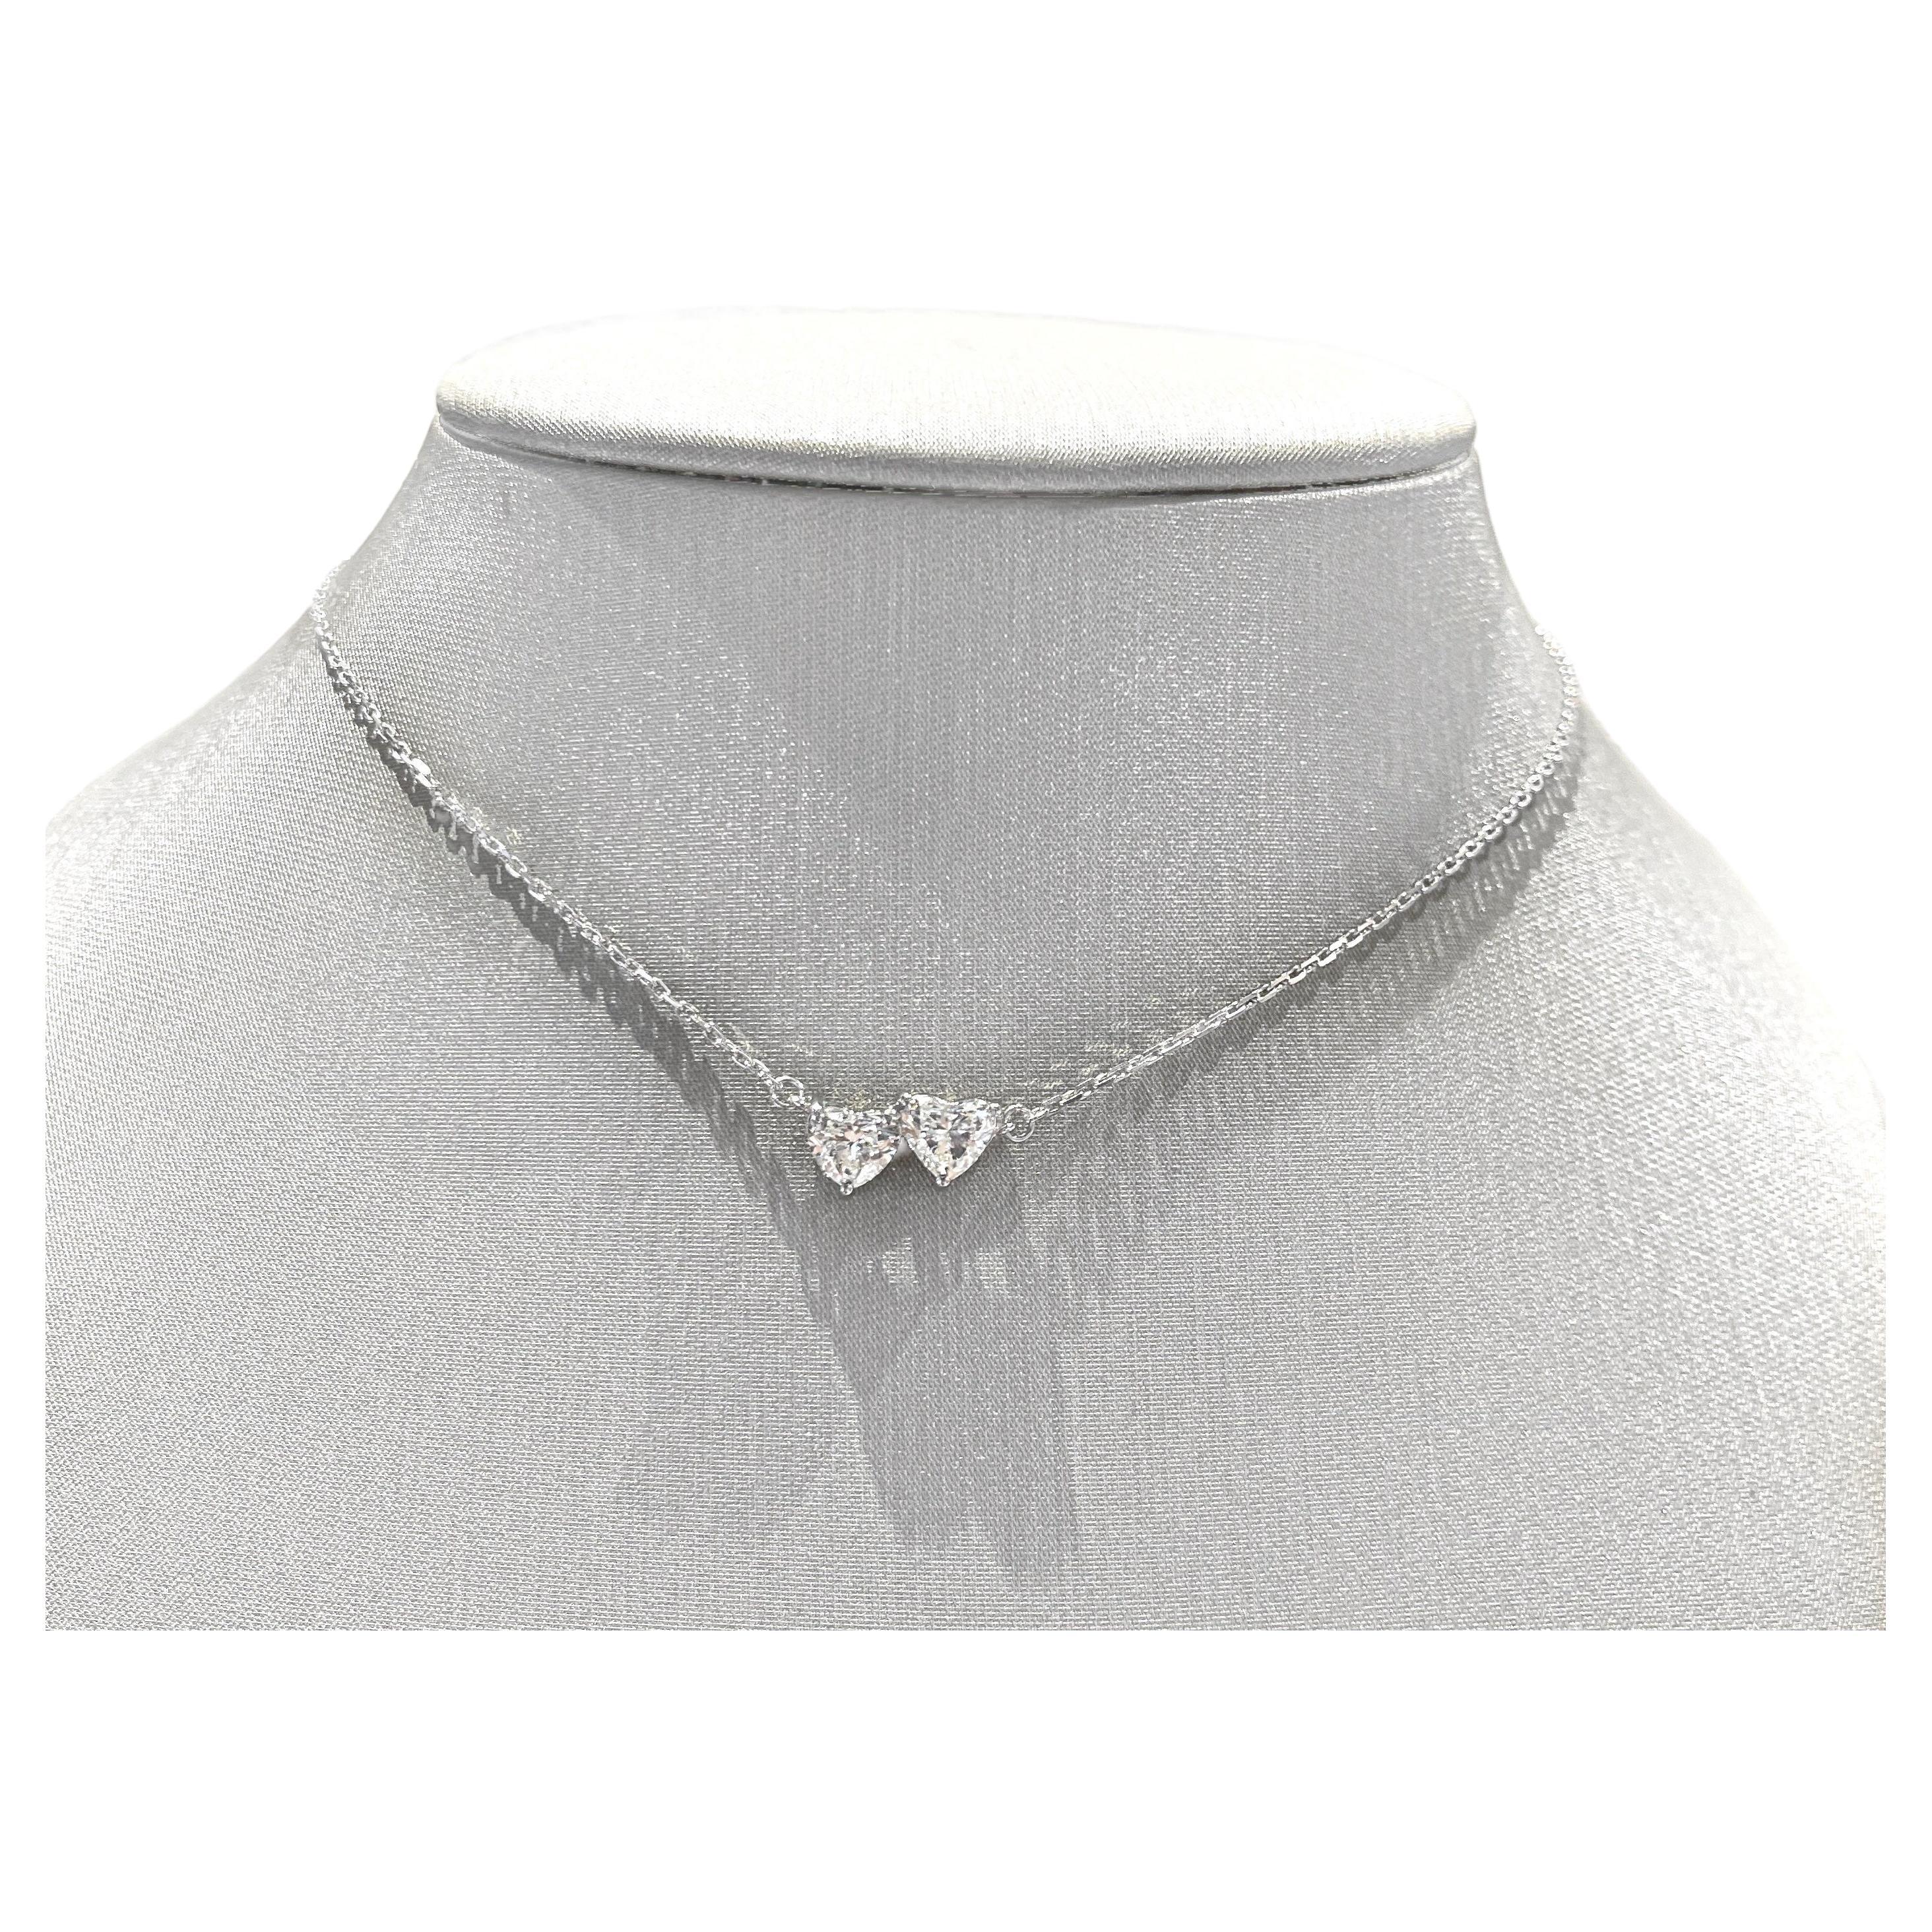 GIA Diamond Hearts Necklace, TCW 1.87 with 18k White Gold Chain